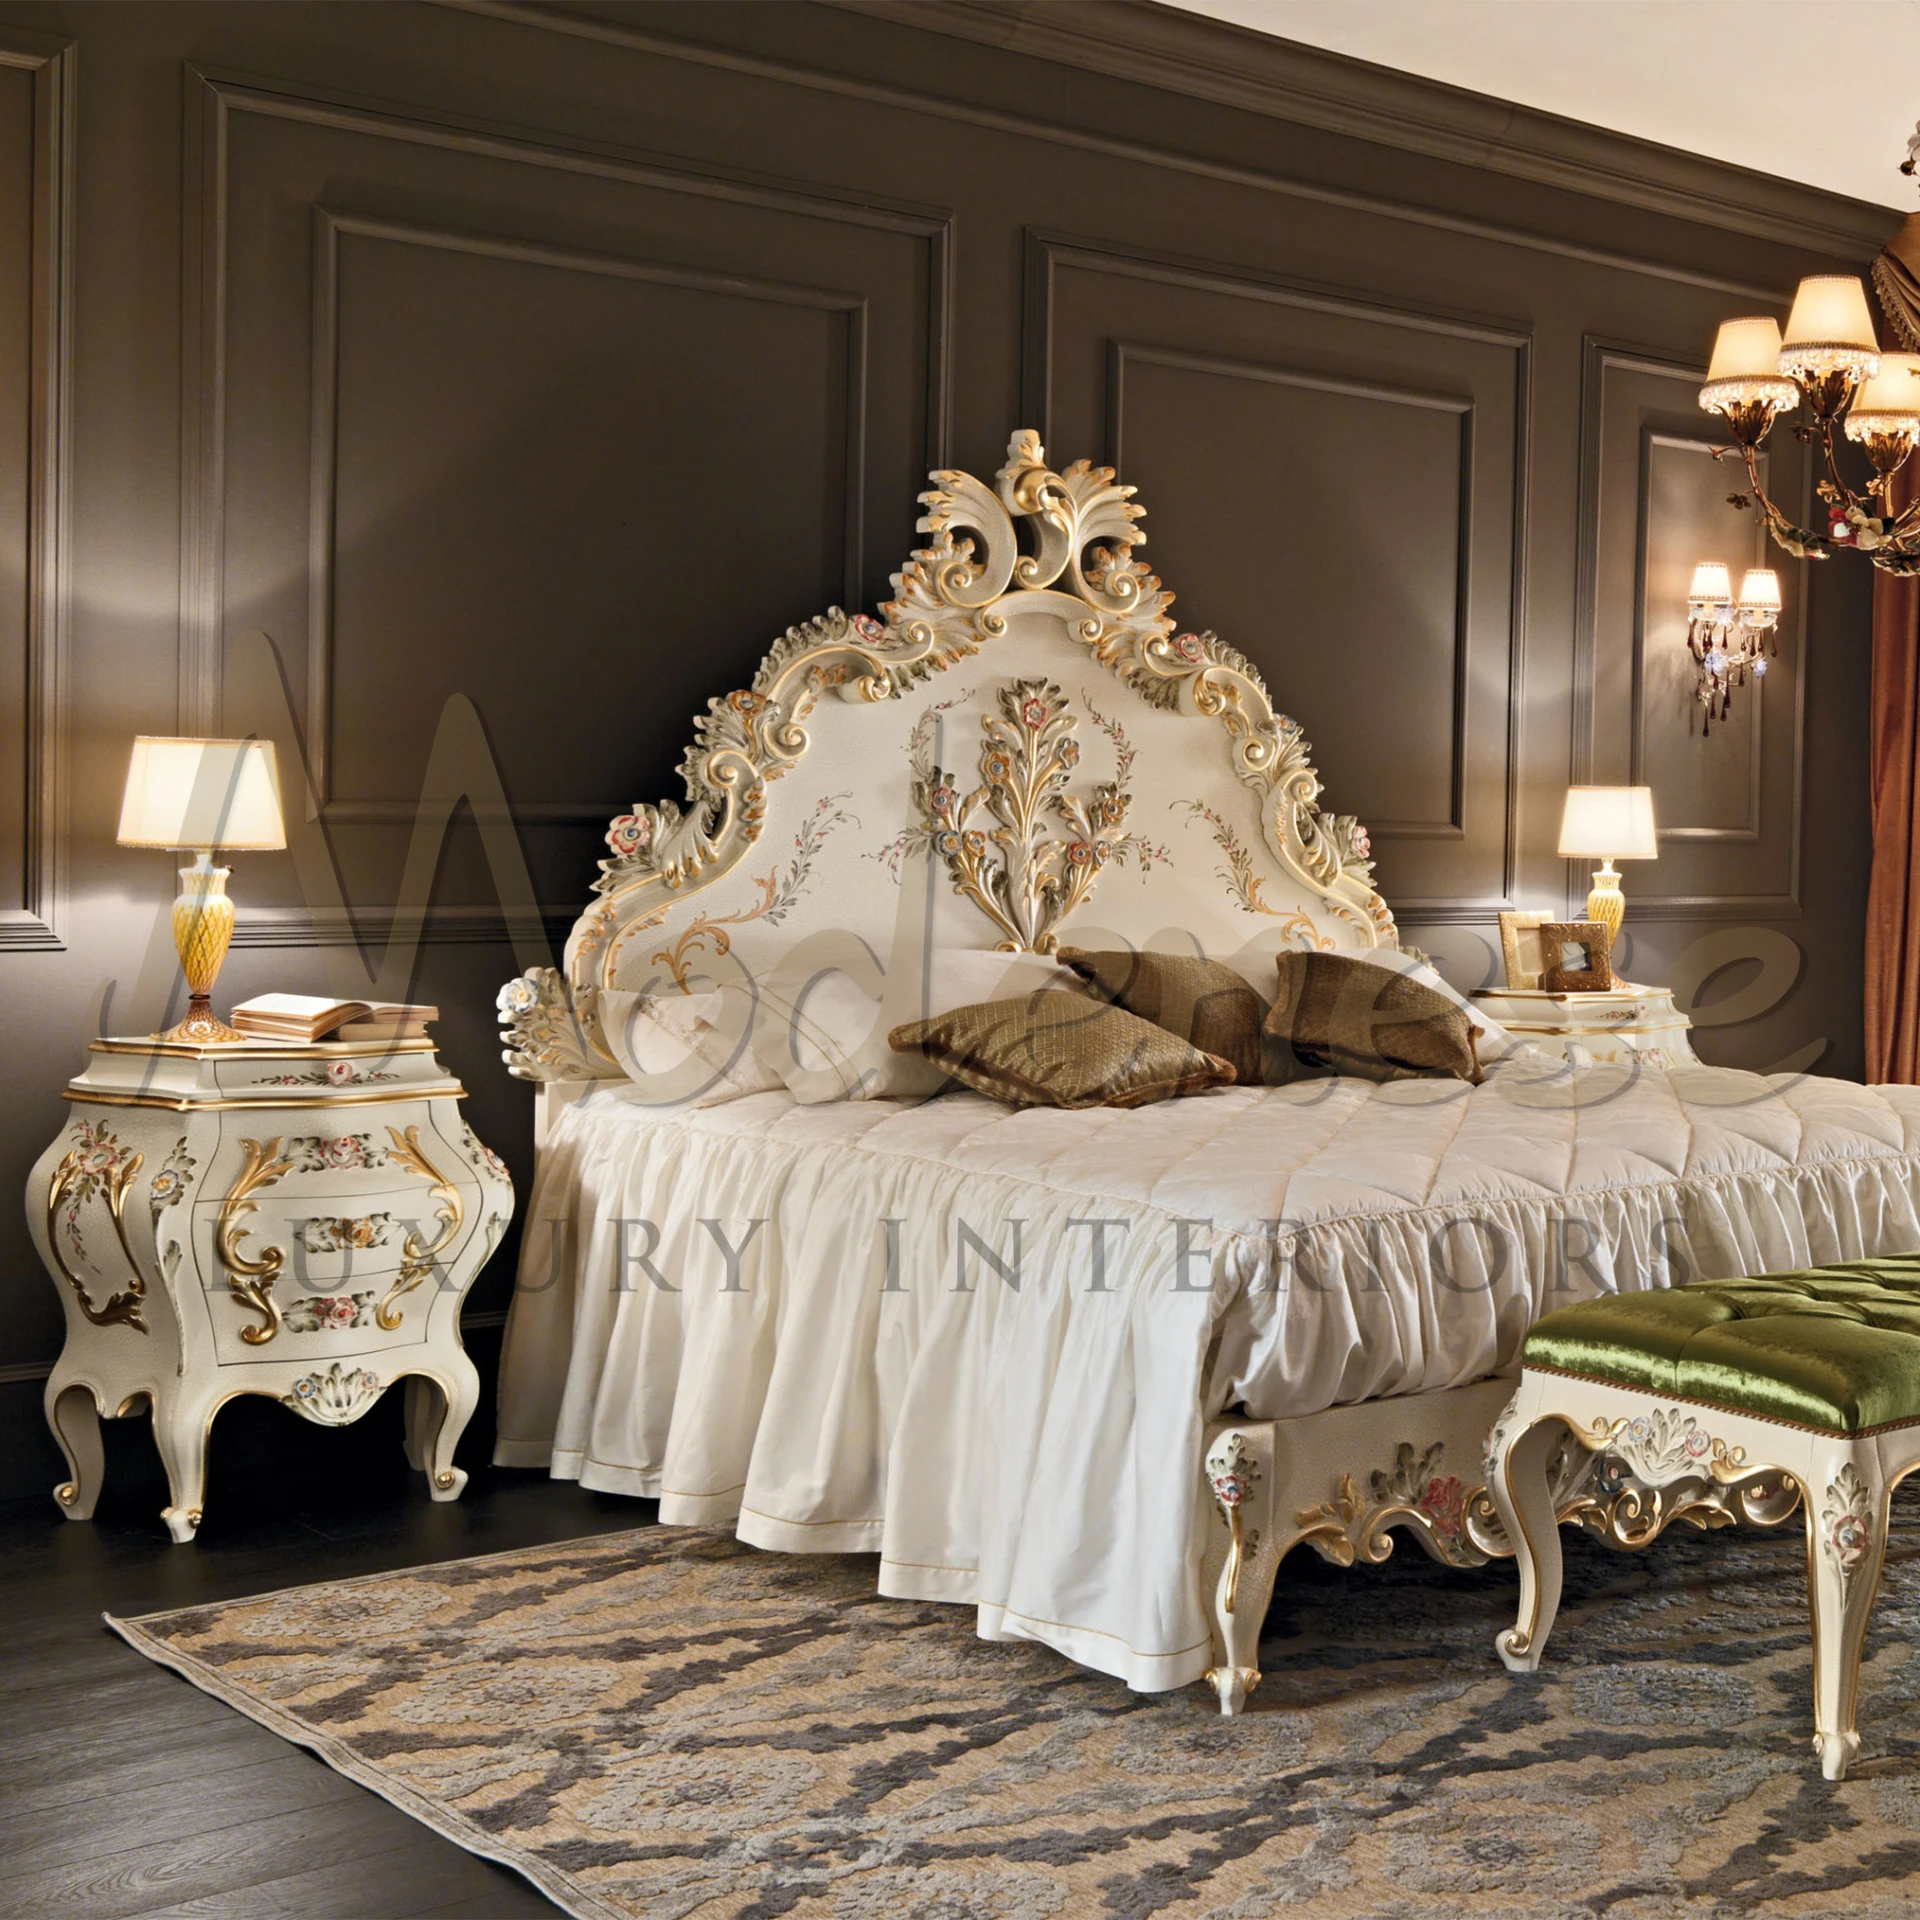 Luxury Bedroom Design With Noble Hand-Made Decor created by Italian artisans  Modenese Luxury Furniture Manufacturer in Italy used high quality materials and finishing.